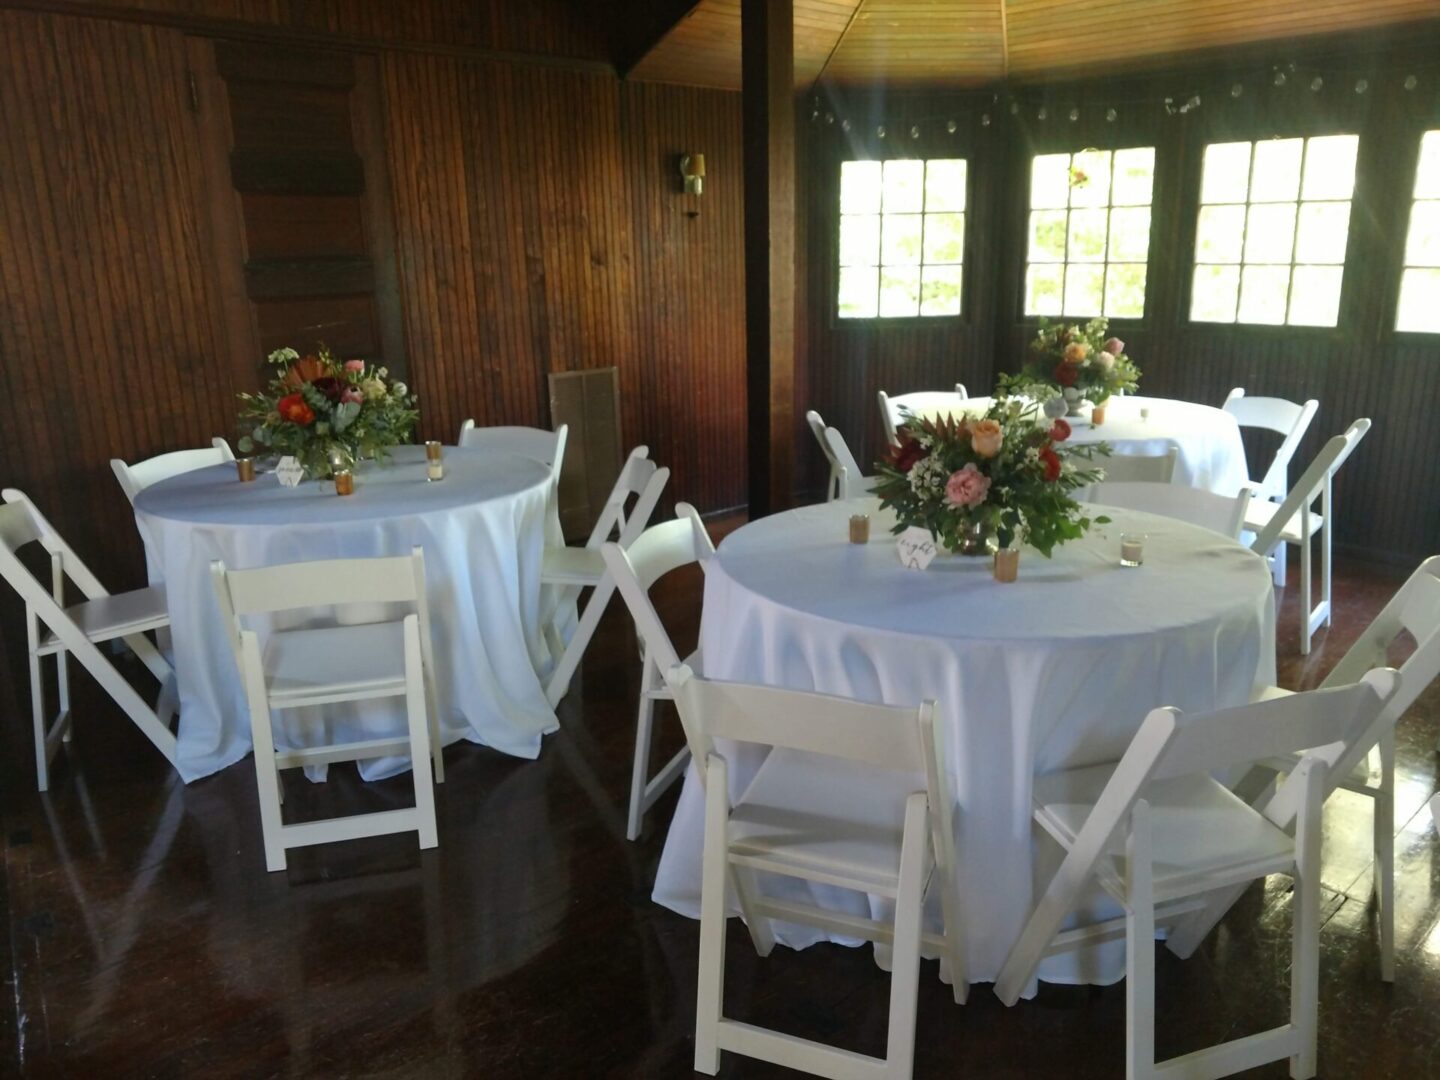 Three round tables with white table cloth and three flower center pieces